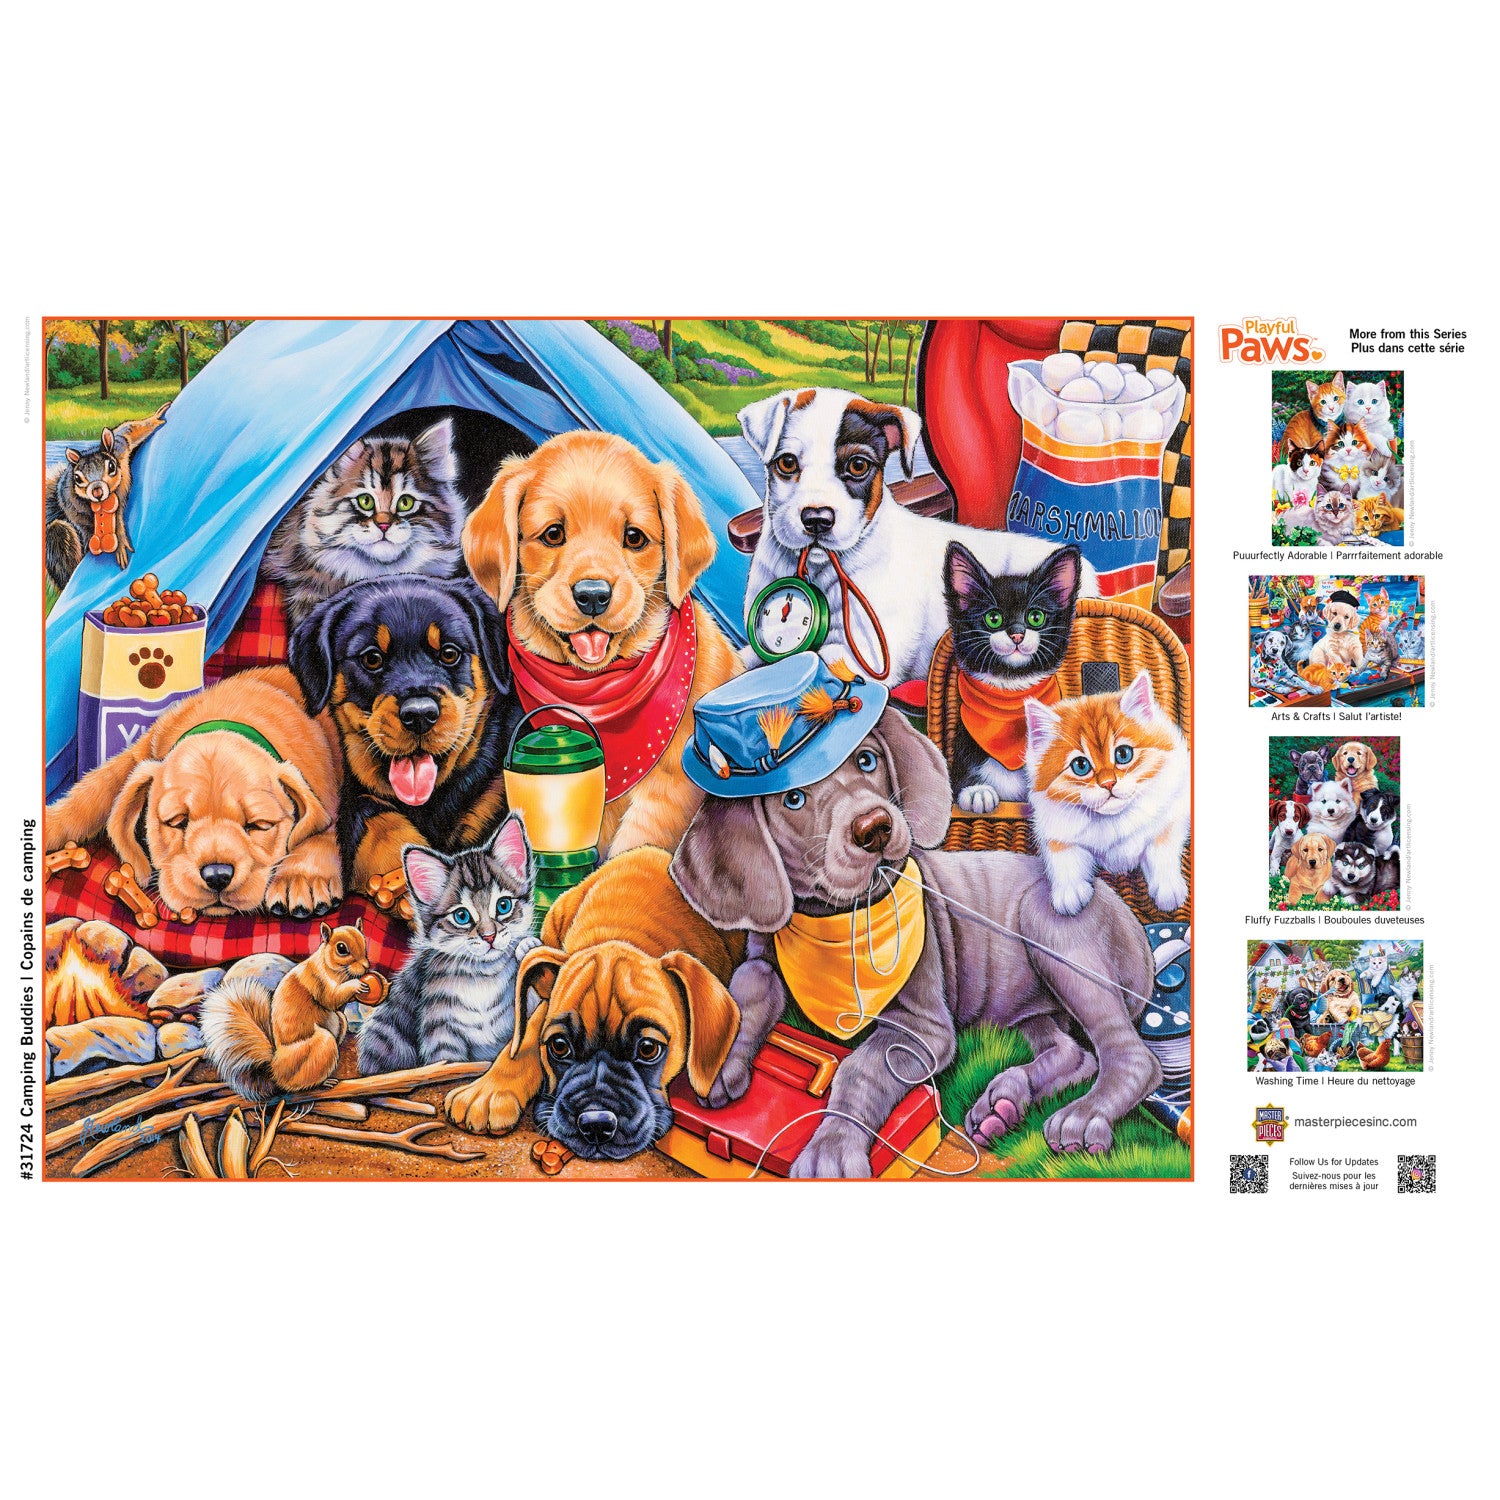 Playful Paws - Camping Buddies 300 Piece Puzzle